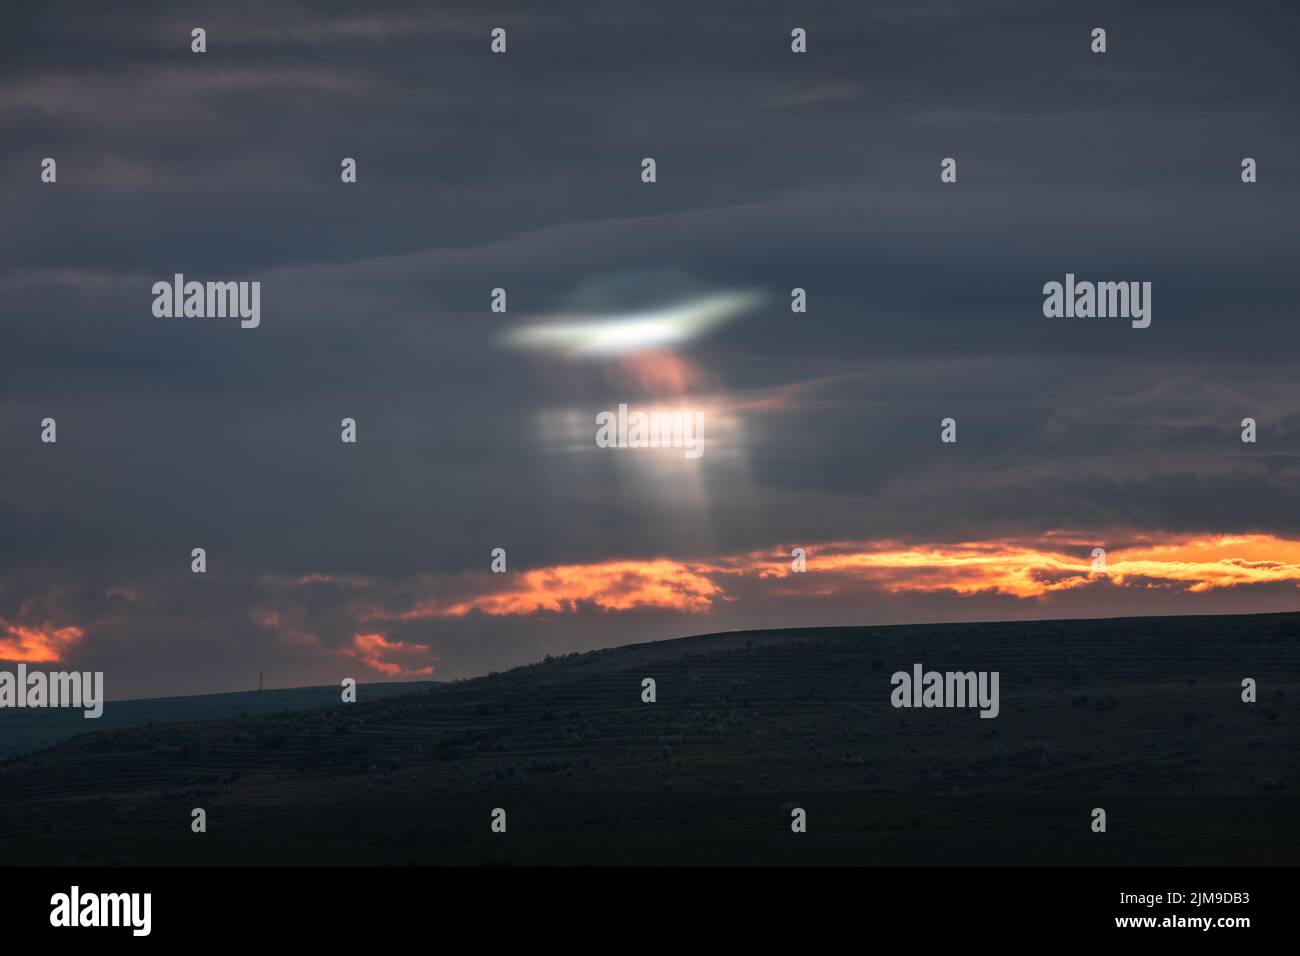 UFO shape lights that is seen passing through the dark clouds. Composit image, UFO shape light was added in post processing to the image. Stock Photo